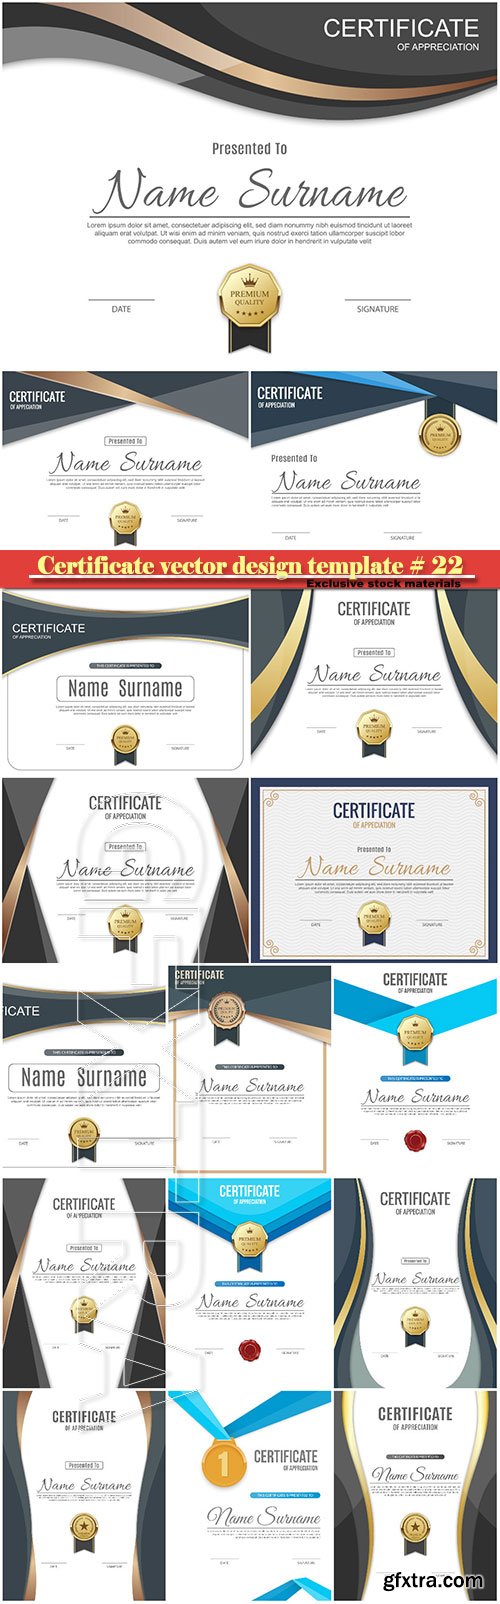 Certificate and vector diploma design template # 22